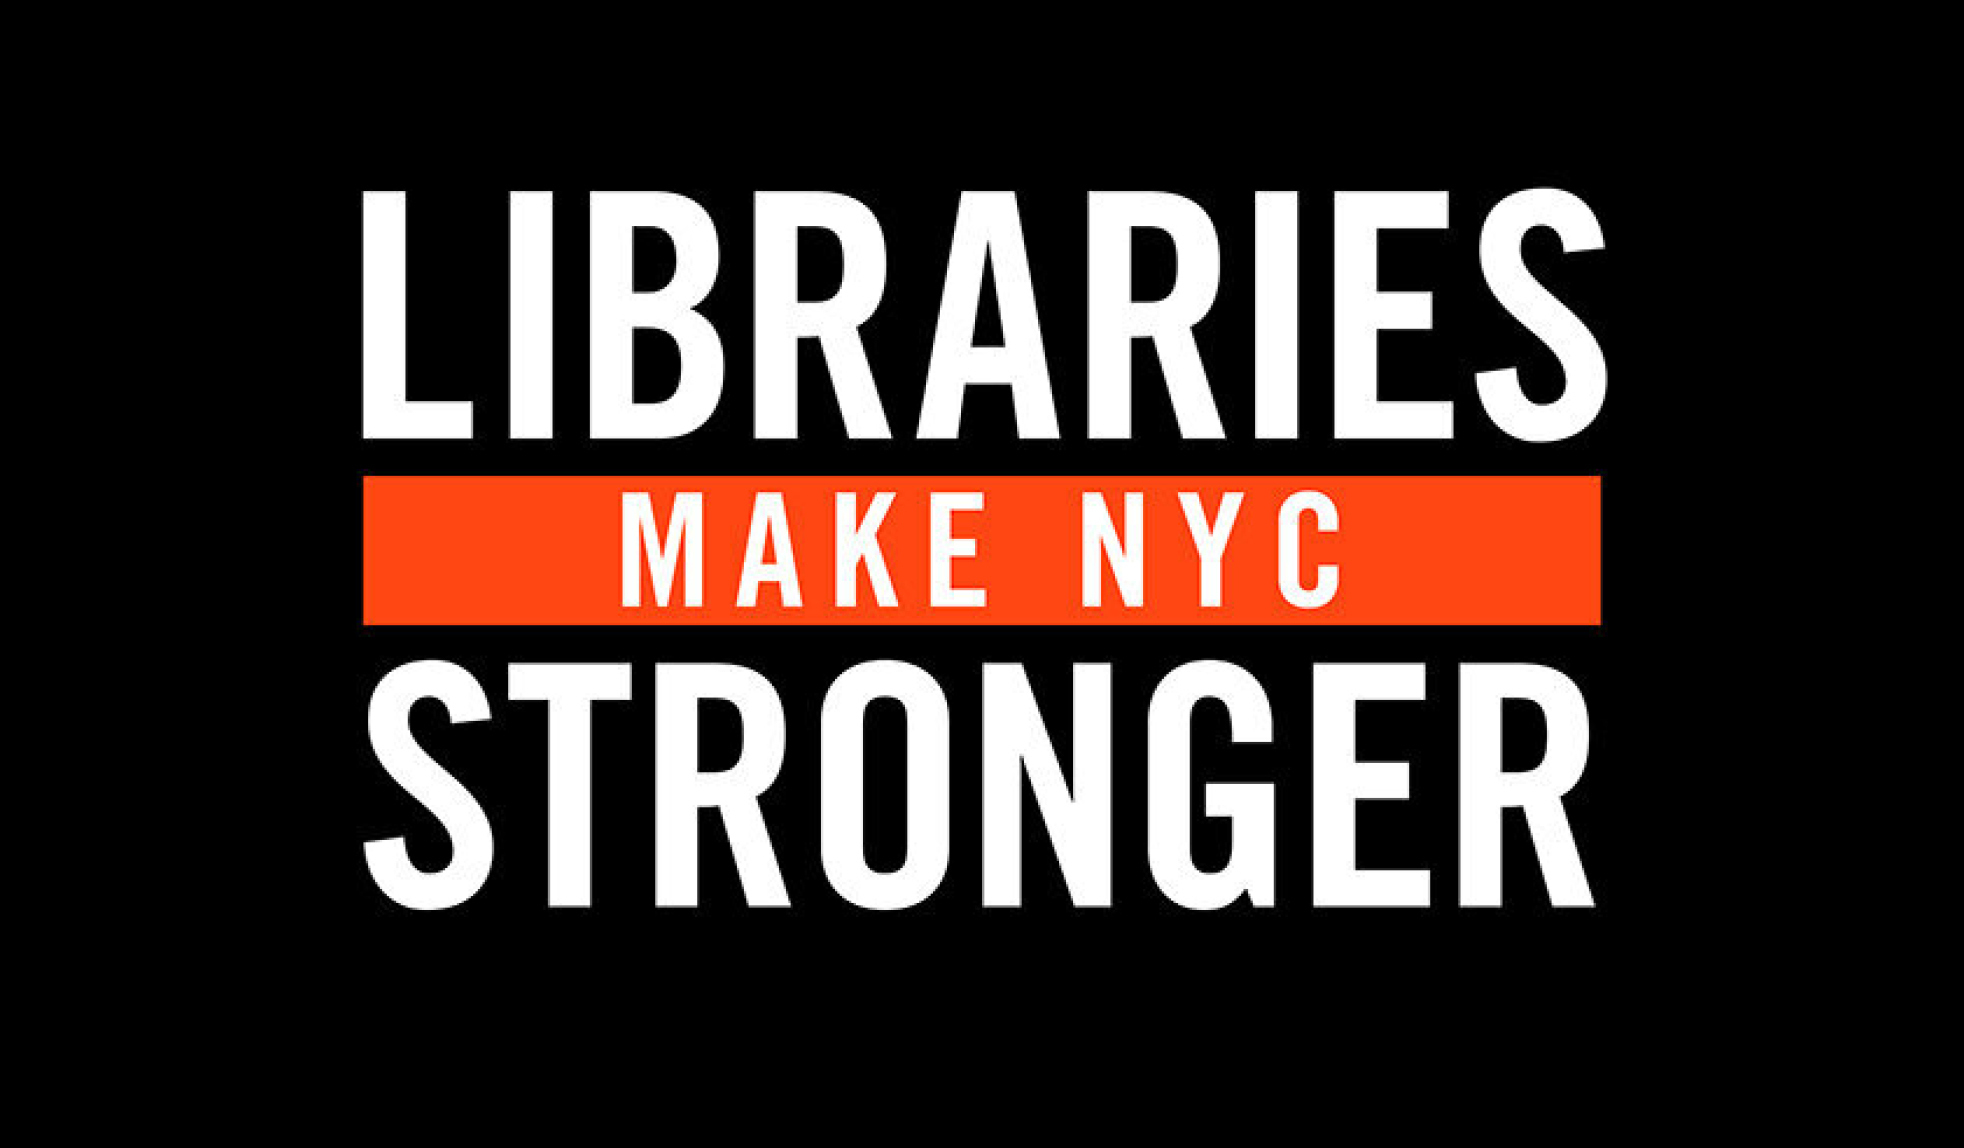 Send an email to your elected officials. Let them know that libraries are essential for New York City's recovery!